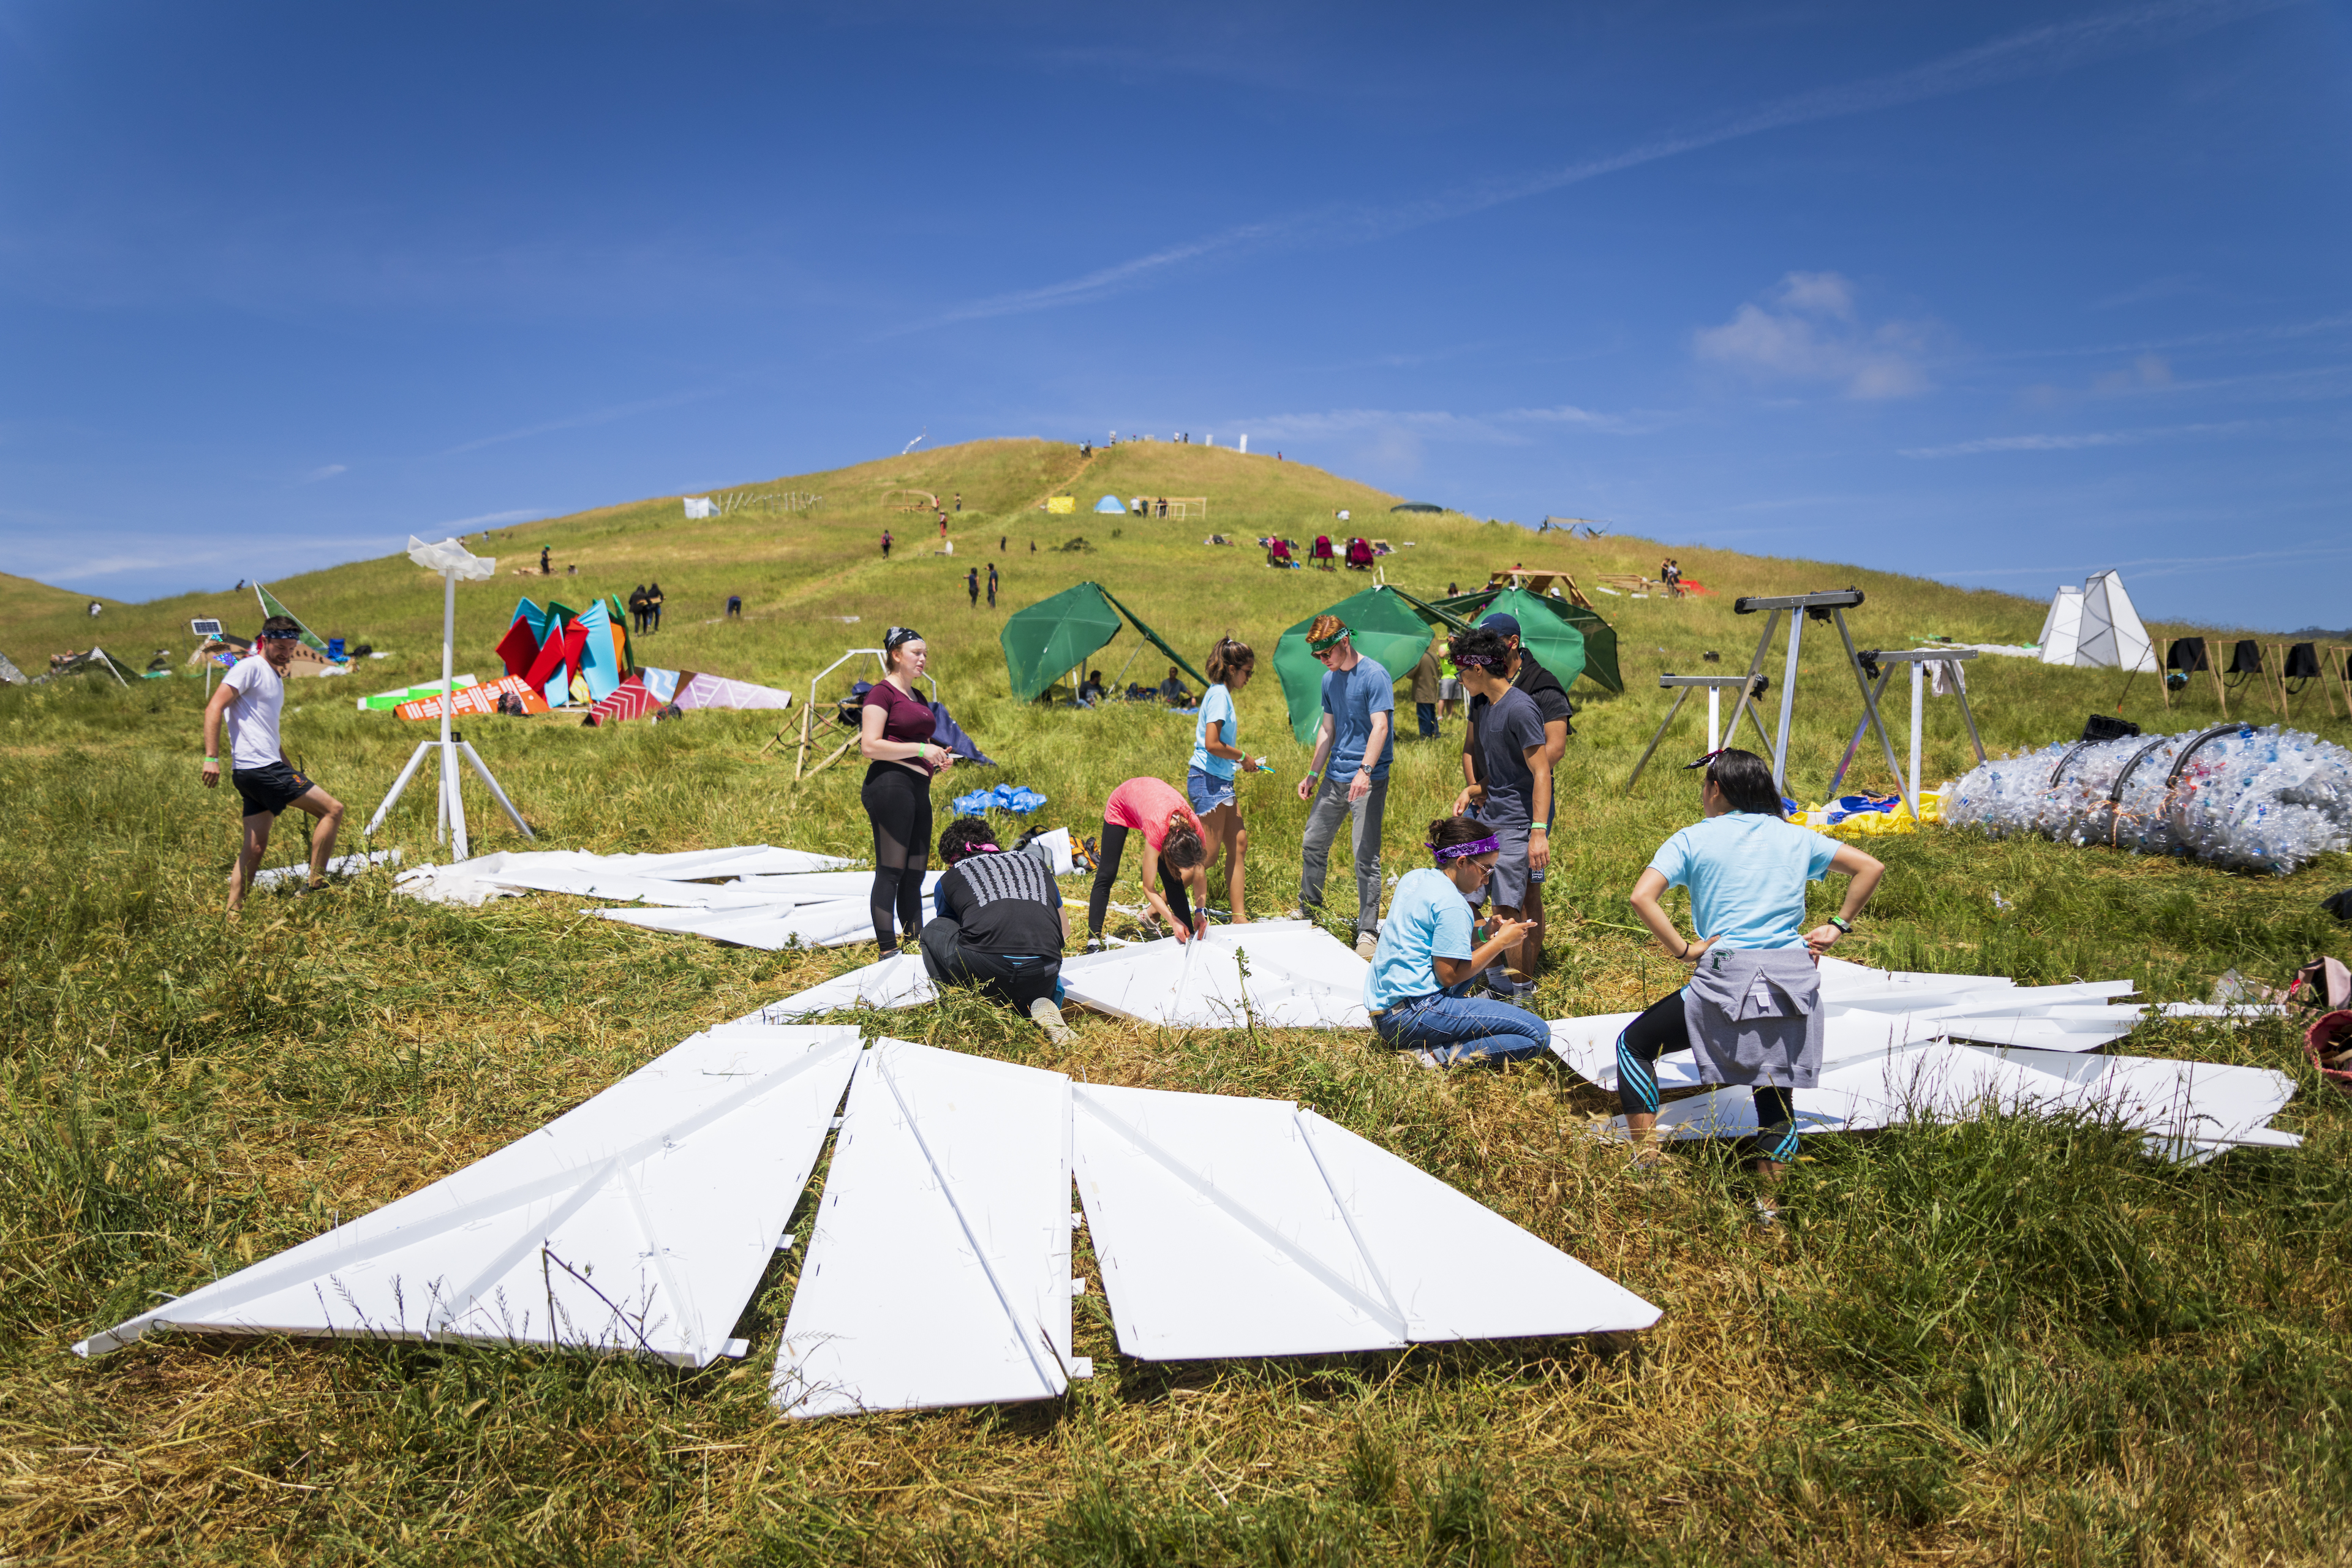 A team of Cal Poly students lays out materials for their structure at the 2019 Design Village competition in Poly Canyon. Photo by Joe Johnston.